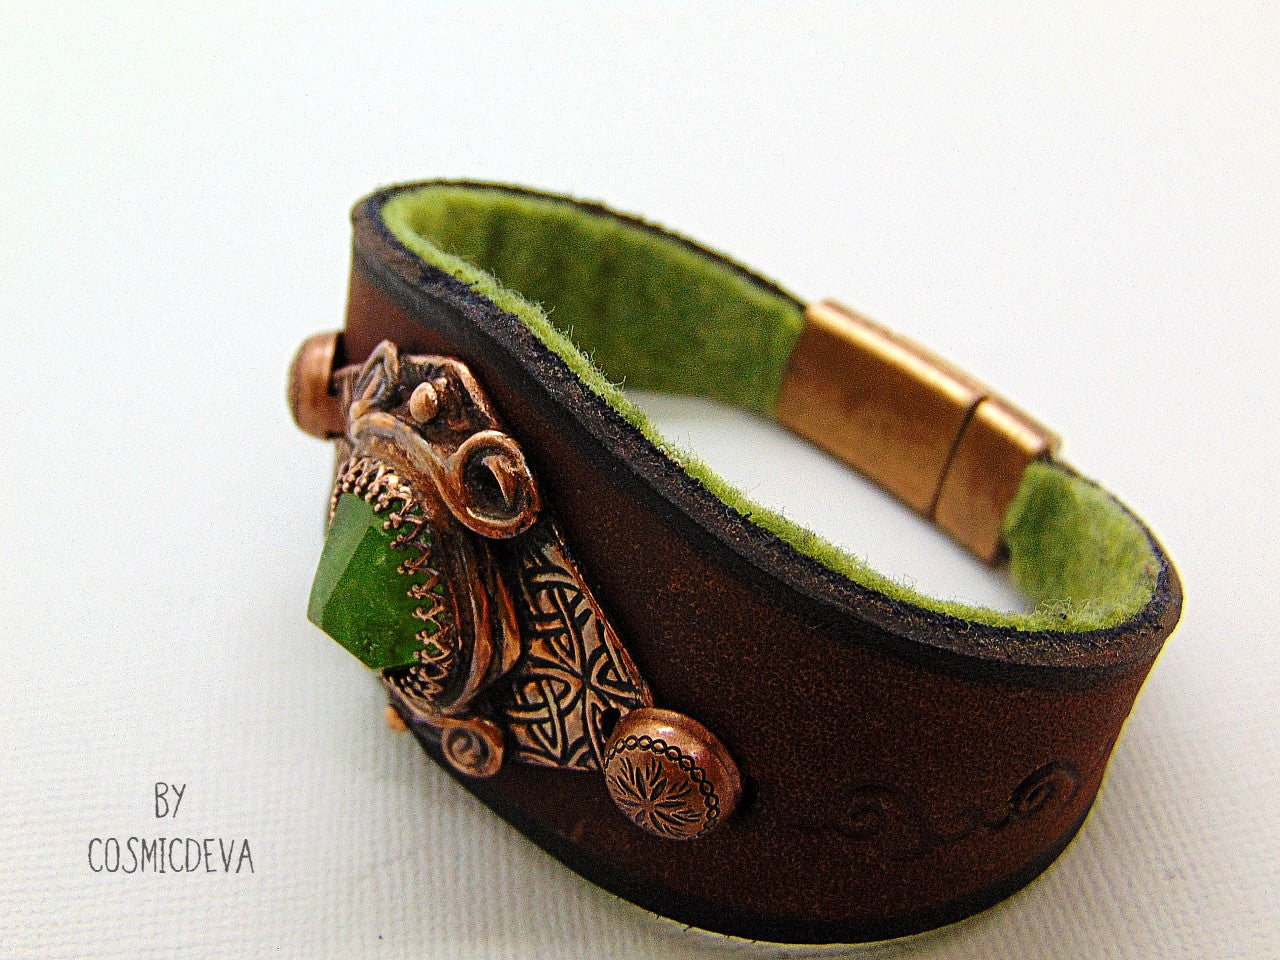 One of a kind handcrafted leather cuff bracelet made of hand cut earthy brown dyed veg tan leather. The focal point is a high quality natural raw green peridot gemstone in a bezel setting on a Celtic design textured solid copper base. The inside of the leather bracelet is lined with olive green felt for your comfort. Cosmicdeva